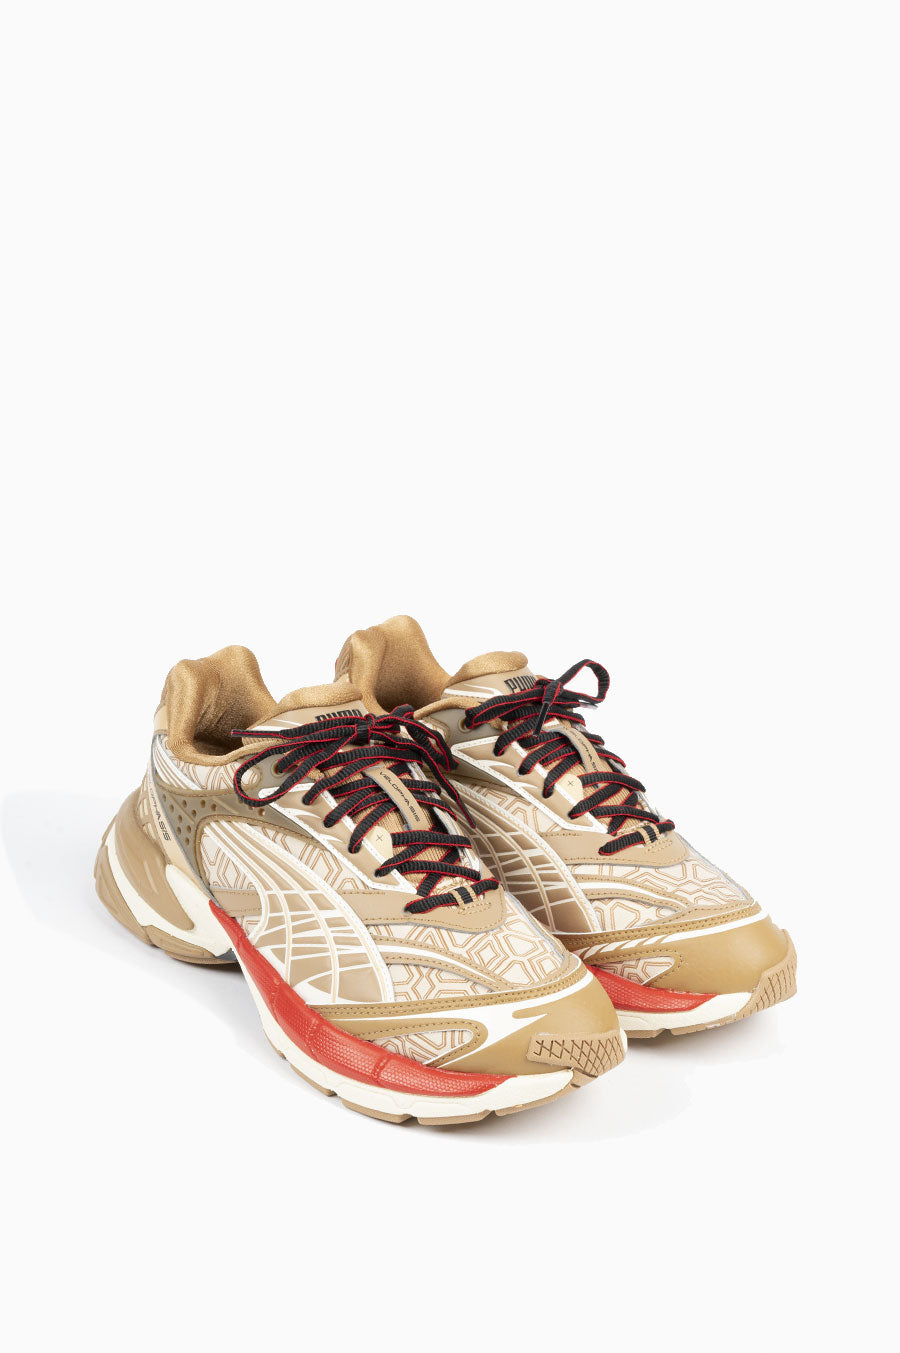 PUMA VELOPHASIS LUXE SPORT FROSTED IVORY TIGERS EYE – BLENDS